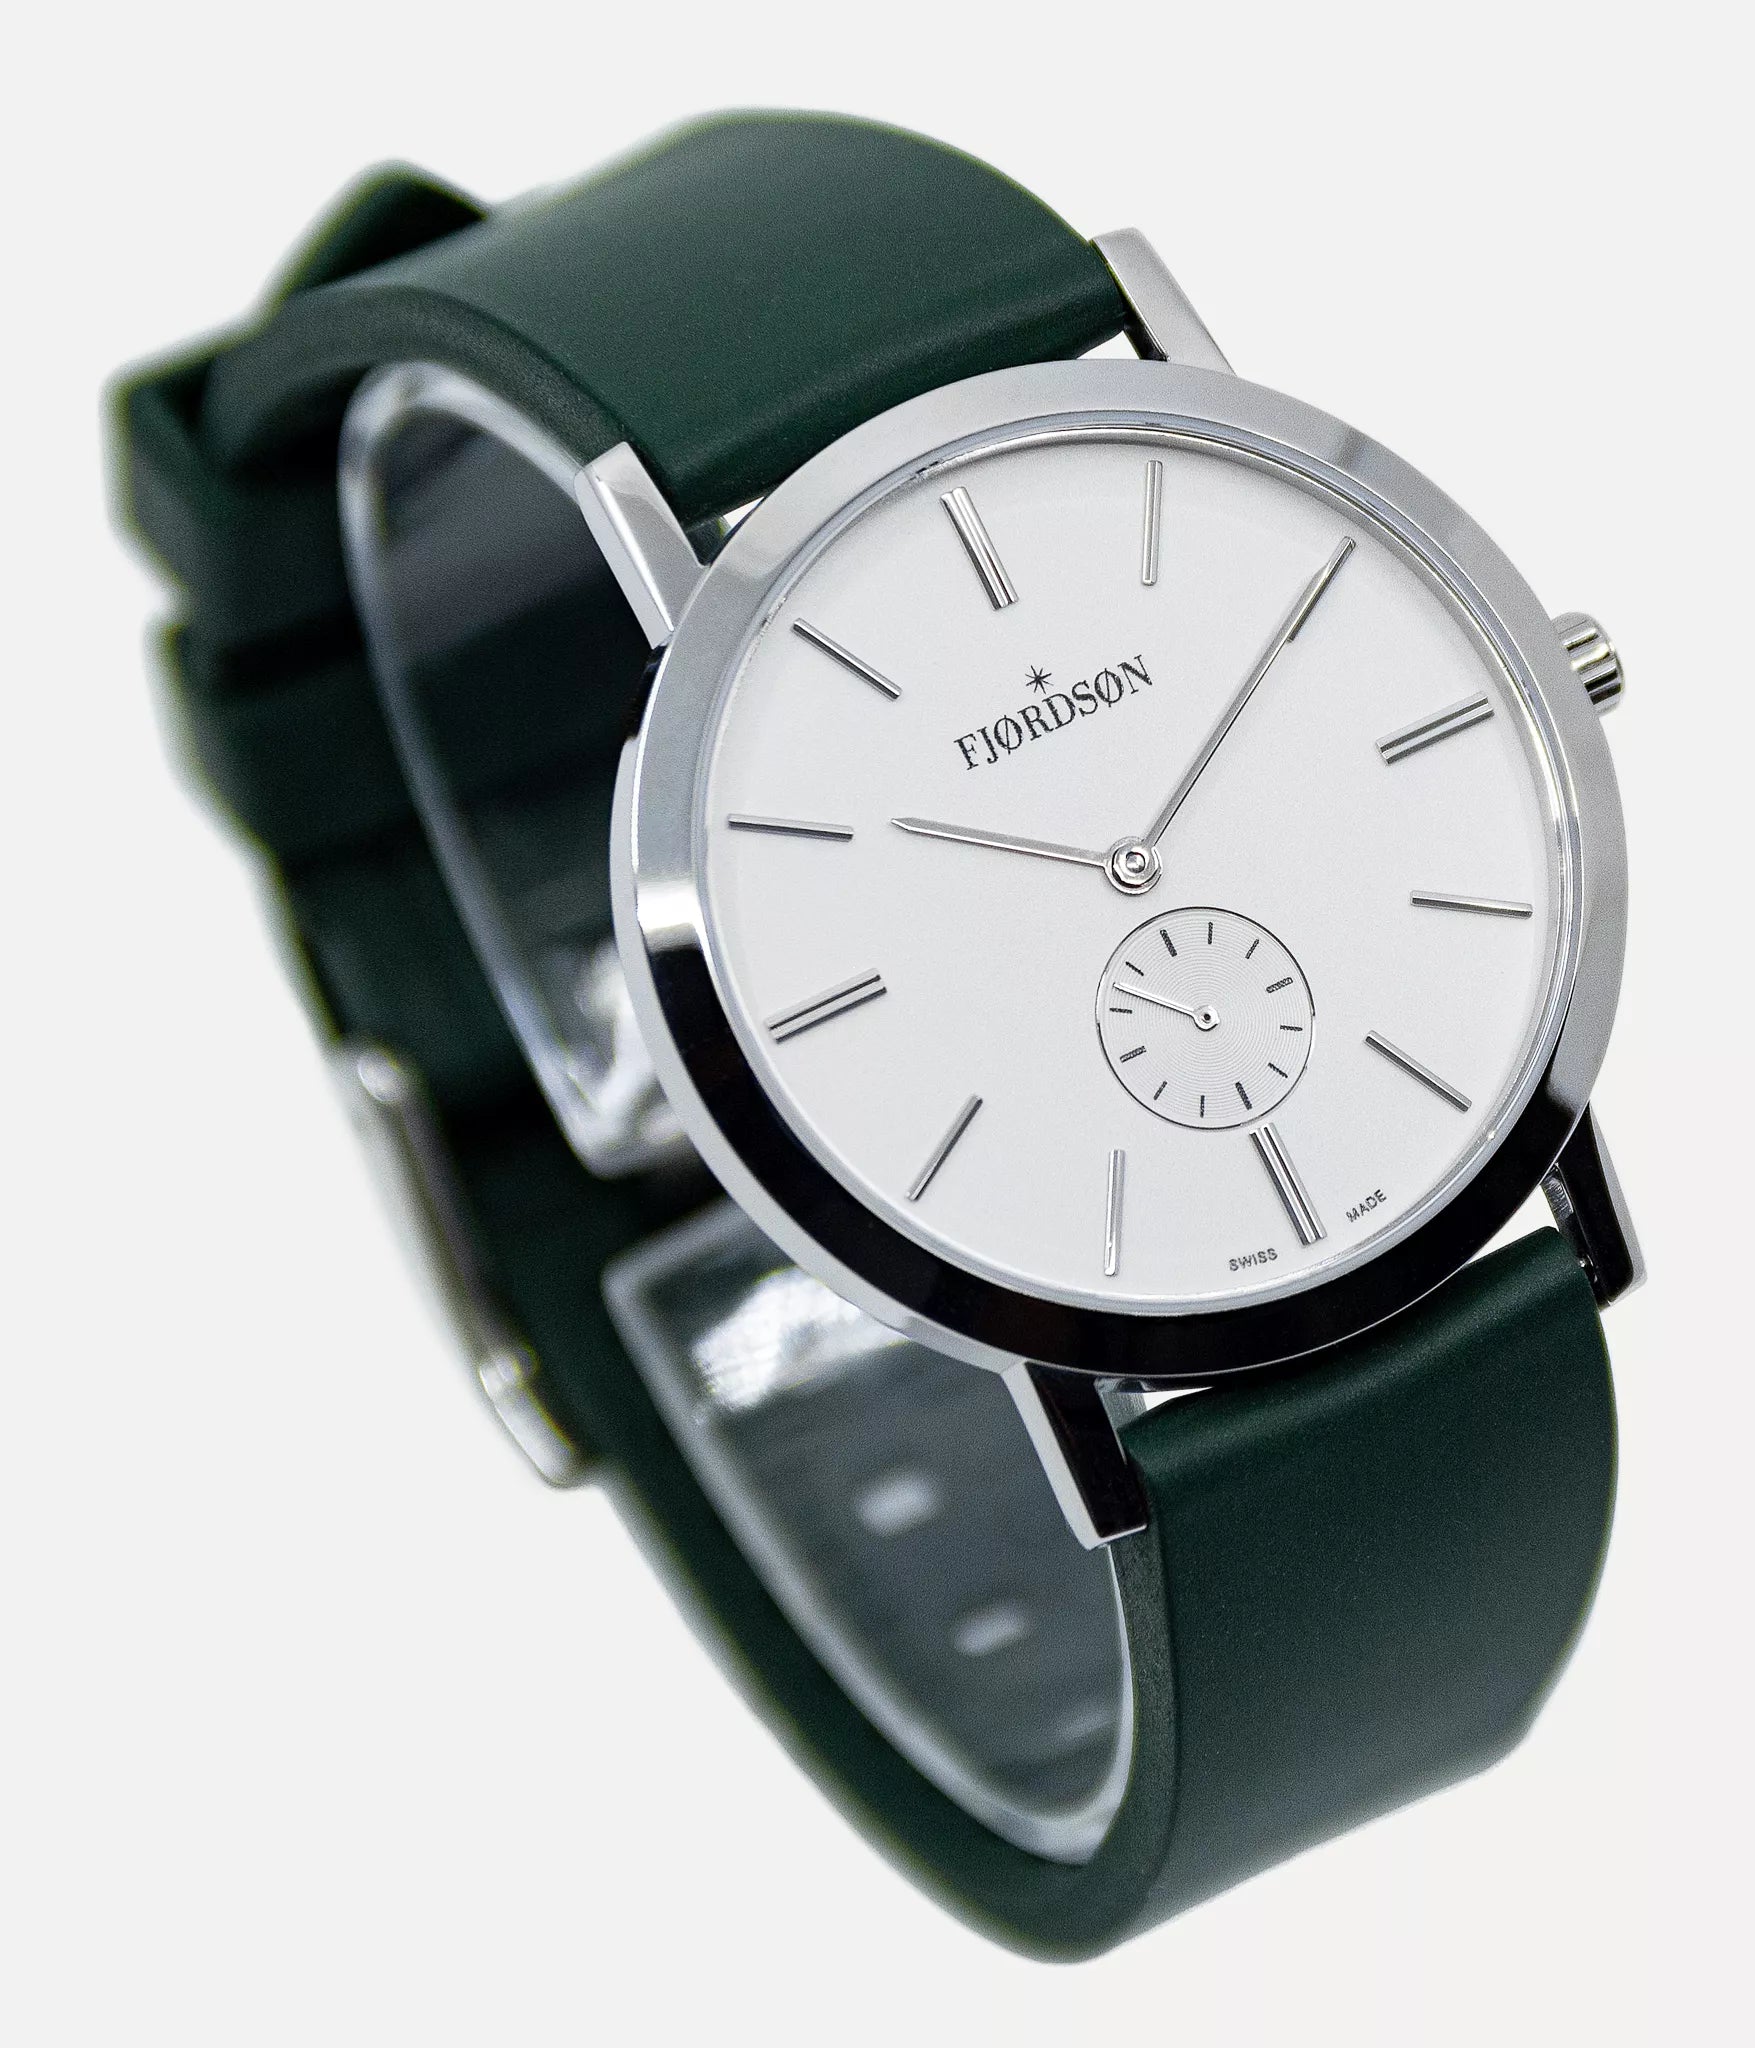 Strap on white dial watch UNISEX shot - Fjordson Green Rubber Watch strap silver buckle - MEN - vegan & approved by PETA - Swiss made